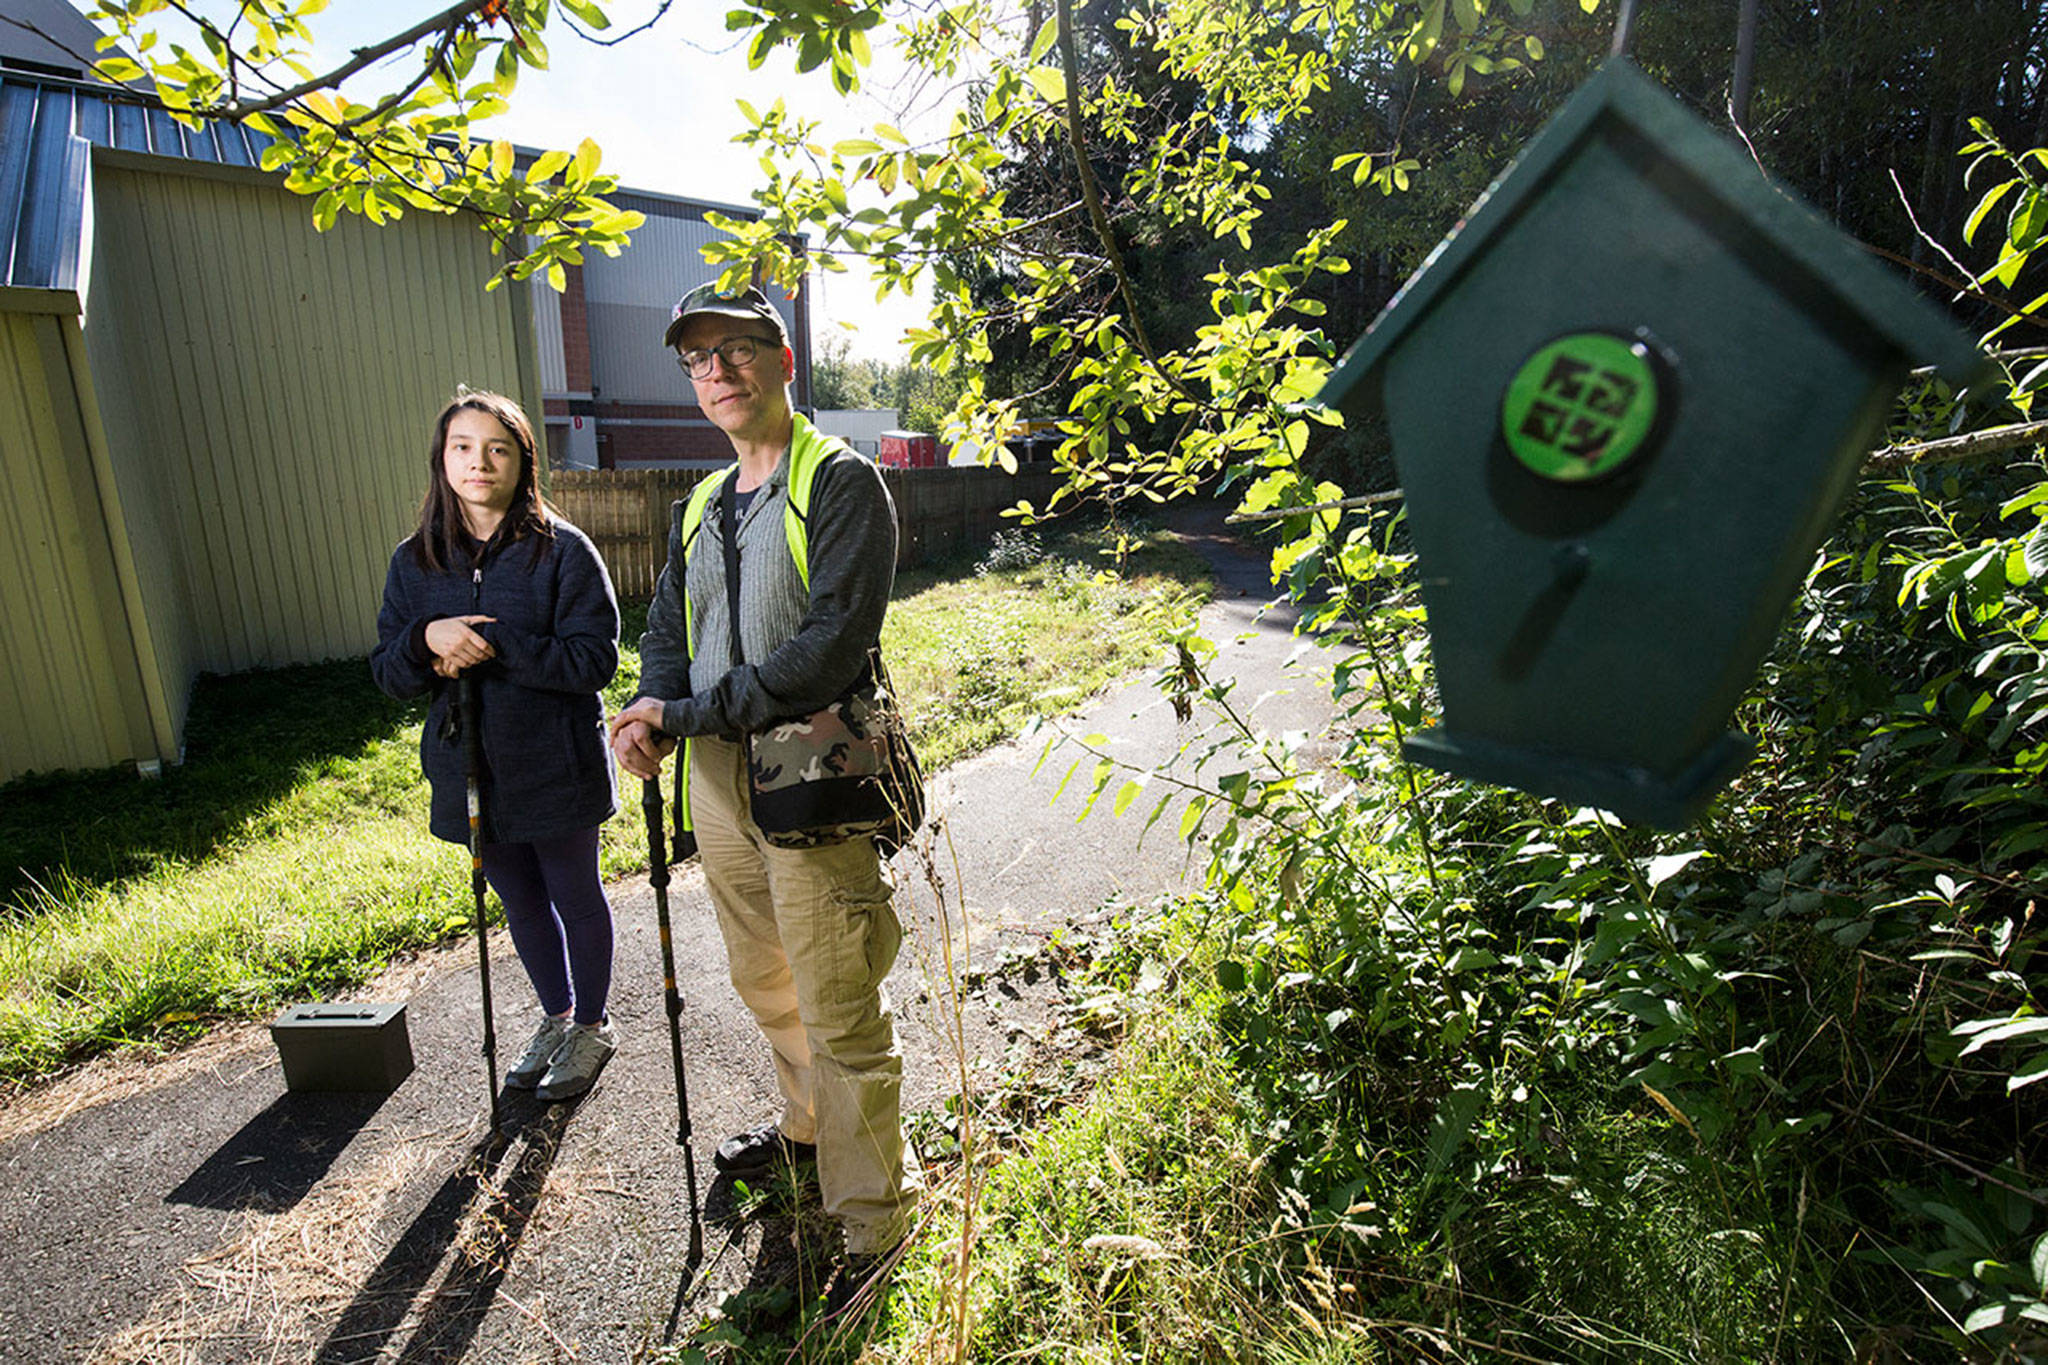 Rich Schliefer and daughter Hinako at one of the new geocache sites put up by the City of Mill Creek on Tuesday, Sept. 18, 2018 in Mill Creek, Wa. (Andy Bronson / The Herald)